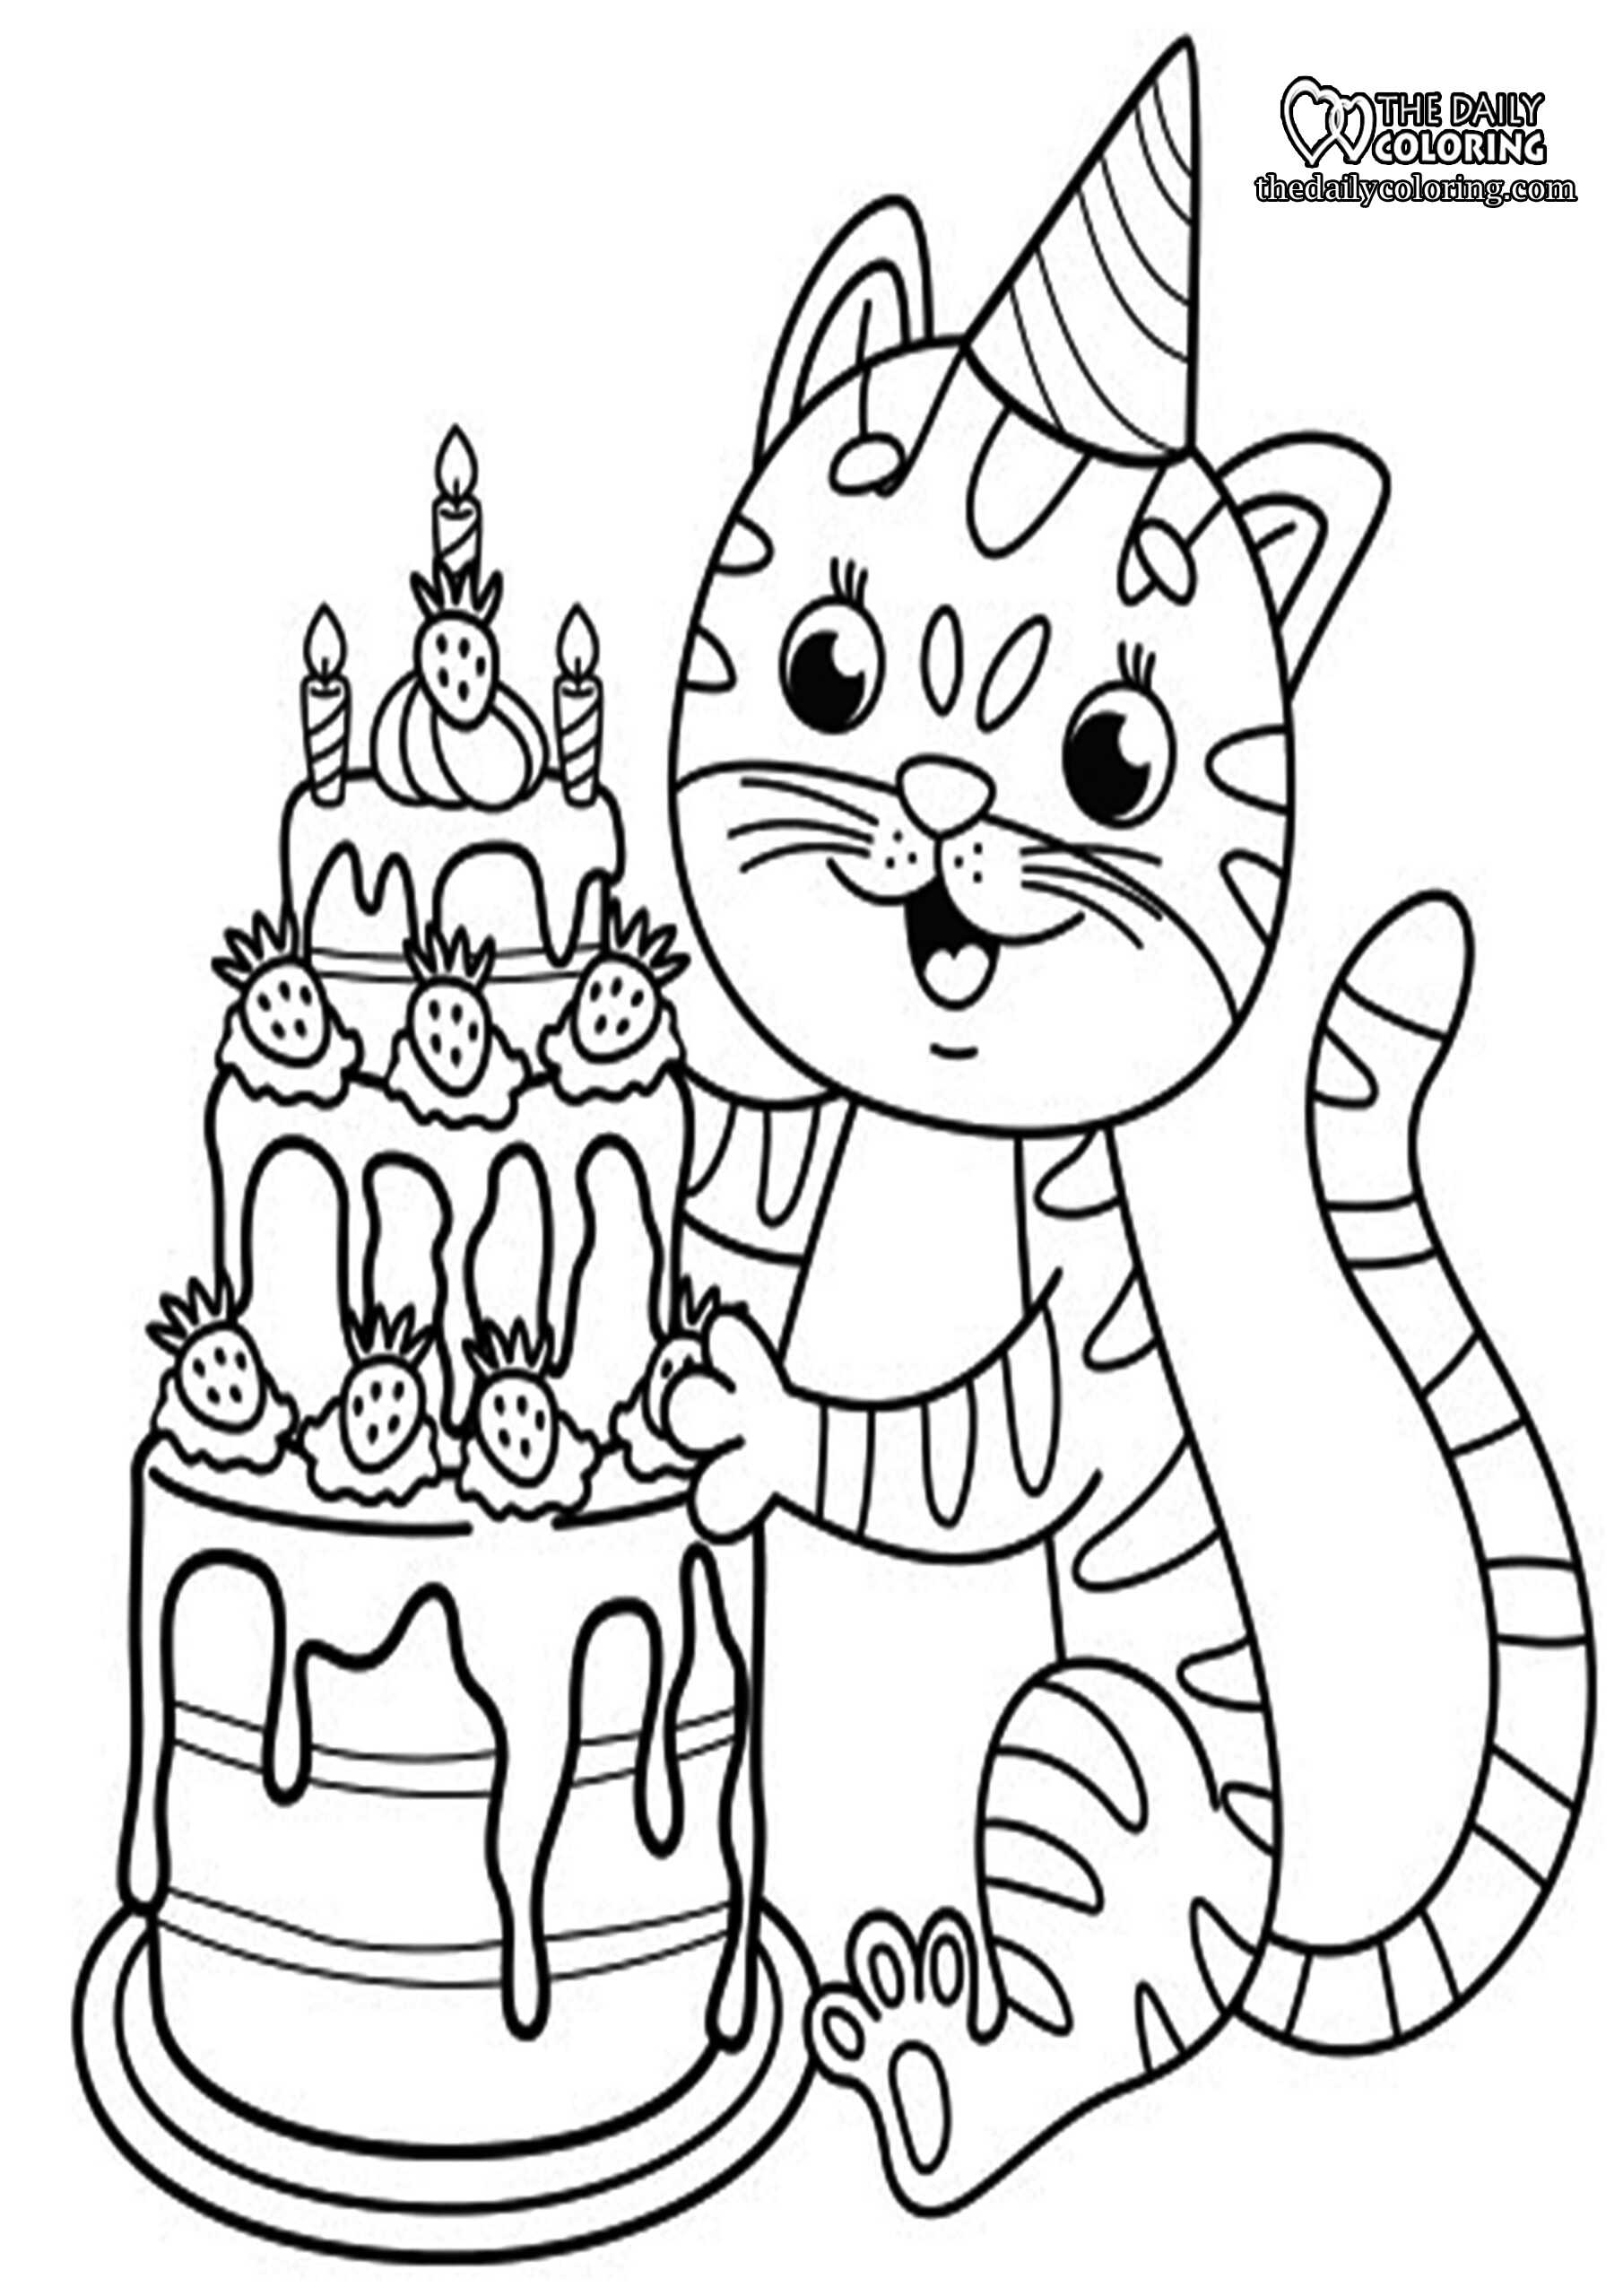 cat-coloring-page